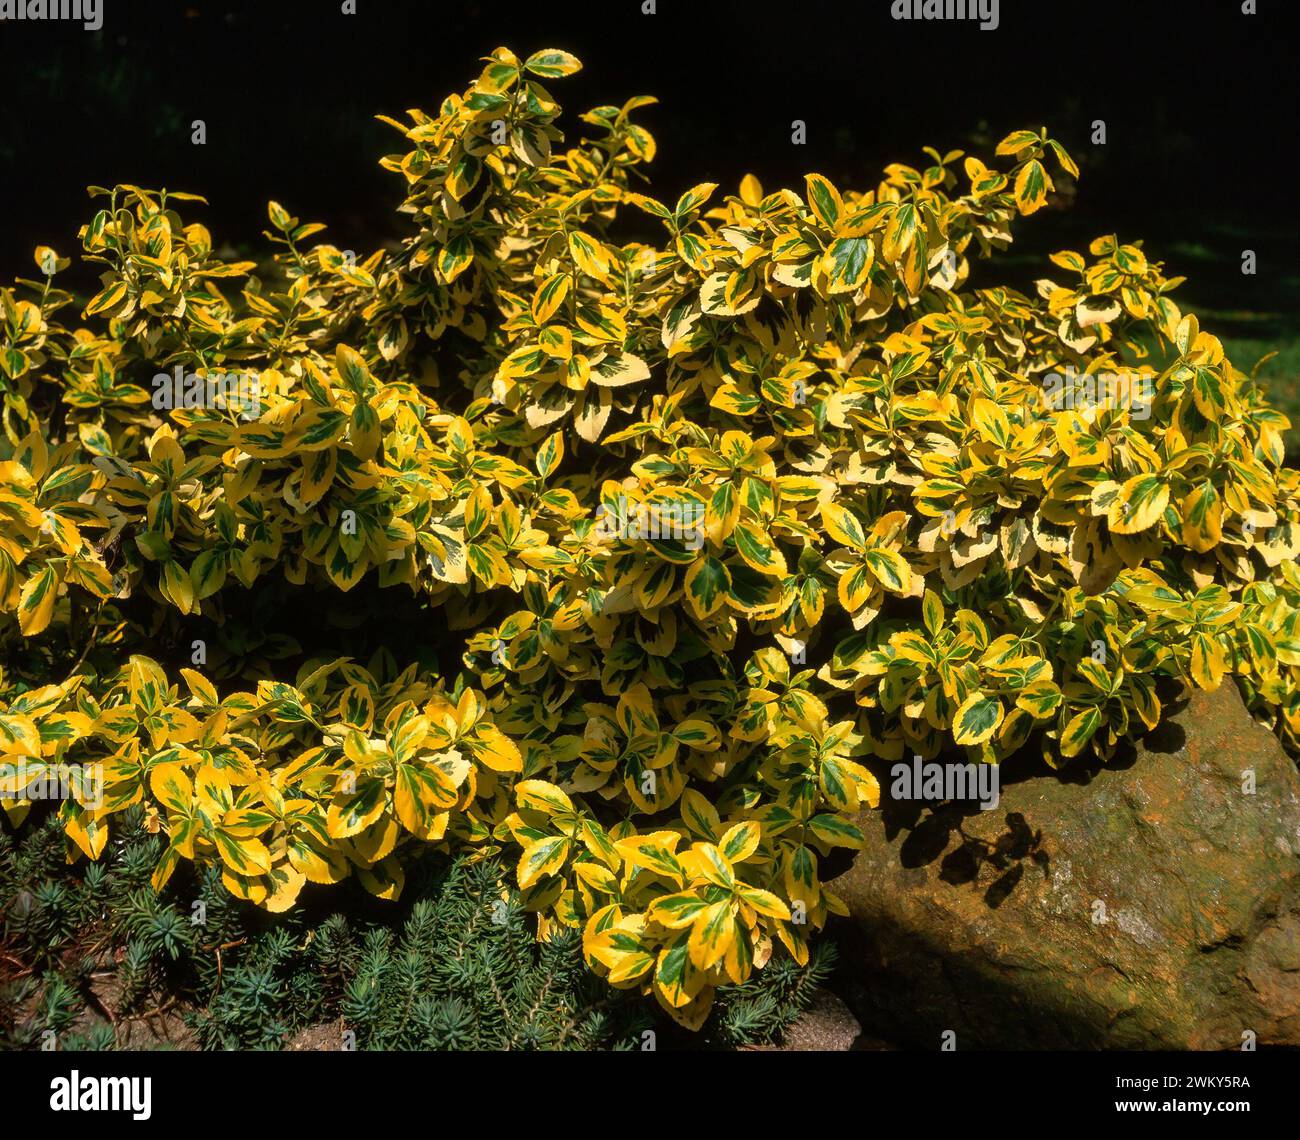 Euonymus fortunei 'Emerald 'n' Gold’ / 'Emerald 'n' Gold’ spindle plant with green and yellow variegated leaves growing in English Garden, England, UK Stock Photo